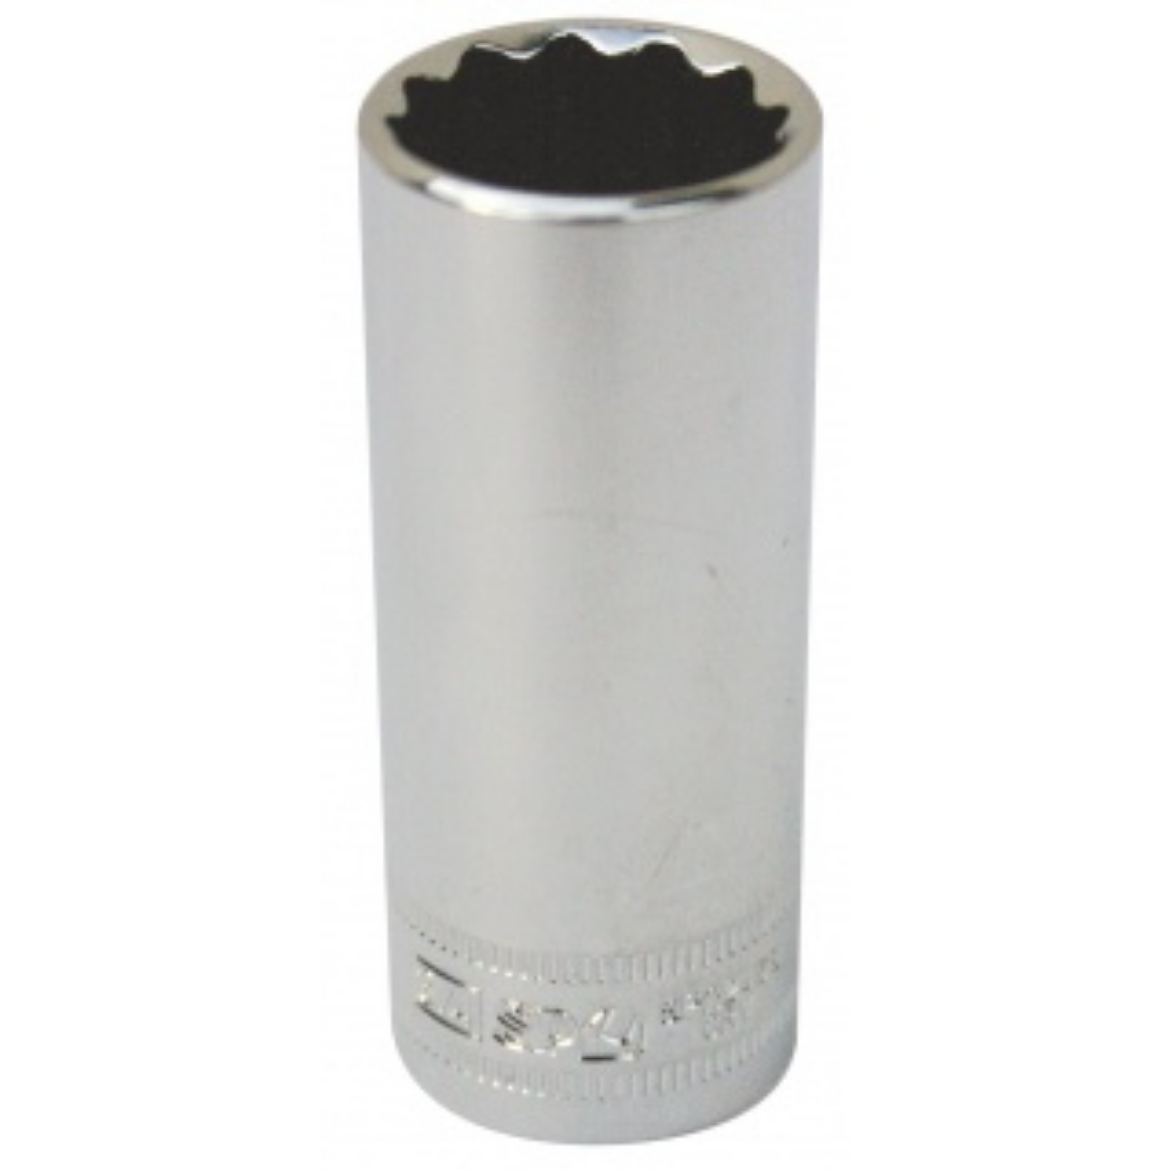 Picture of SOCKET DEEP 3/8"DR 12PT METRIC 10MM SP TOOLS